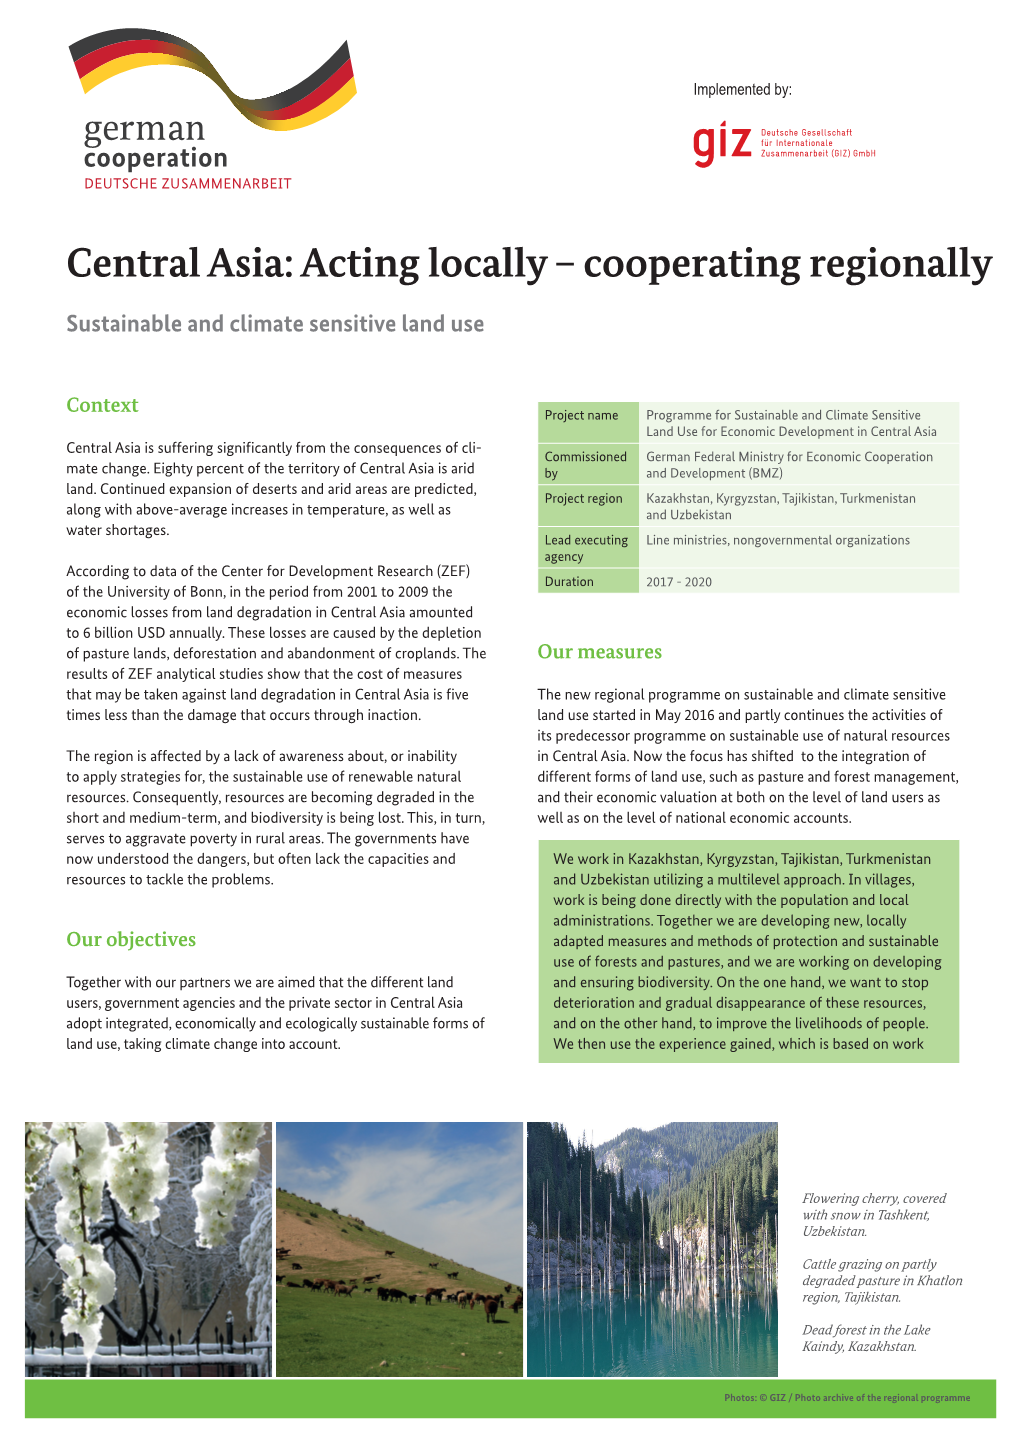 Central Asia: Acting Locally – Cooperating Regionally